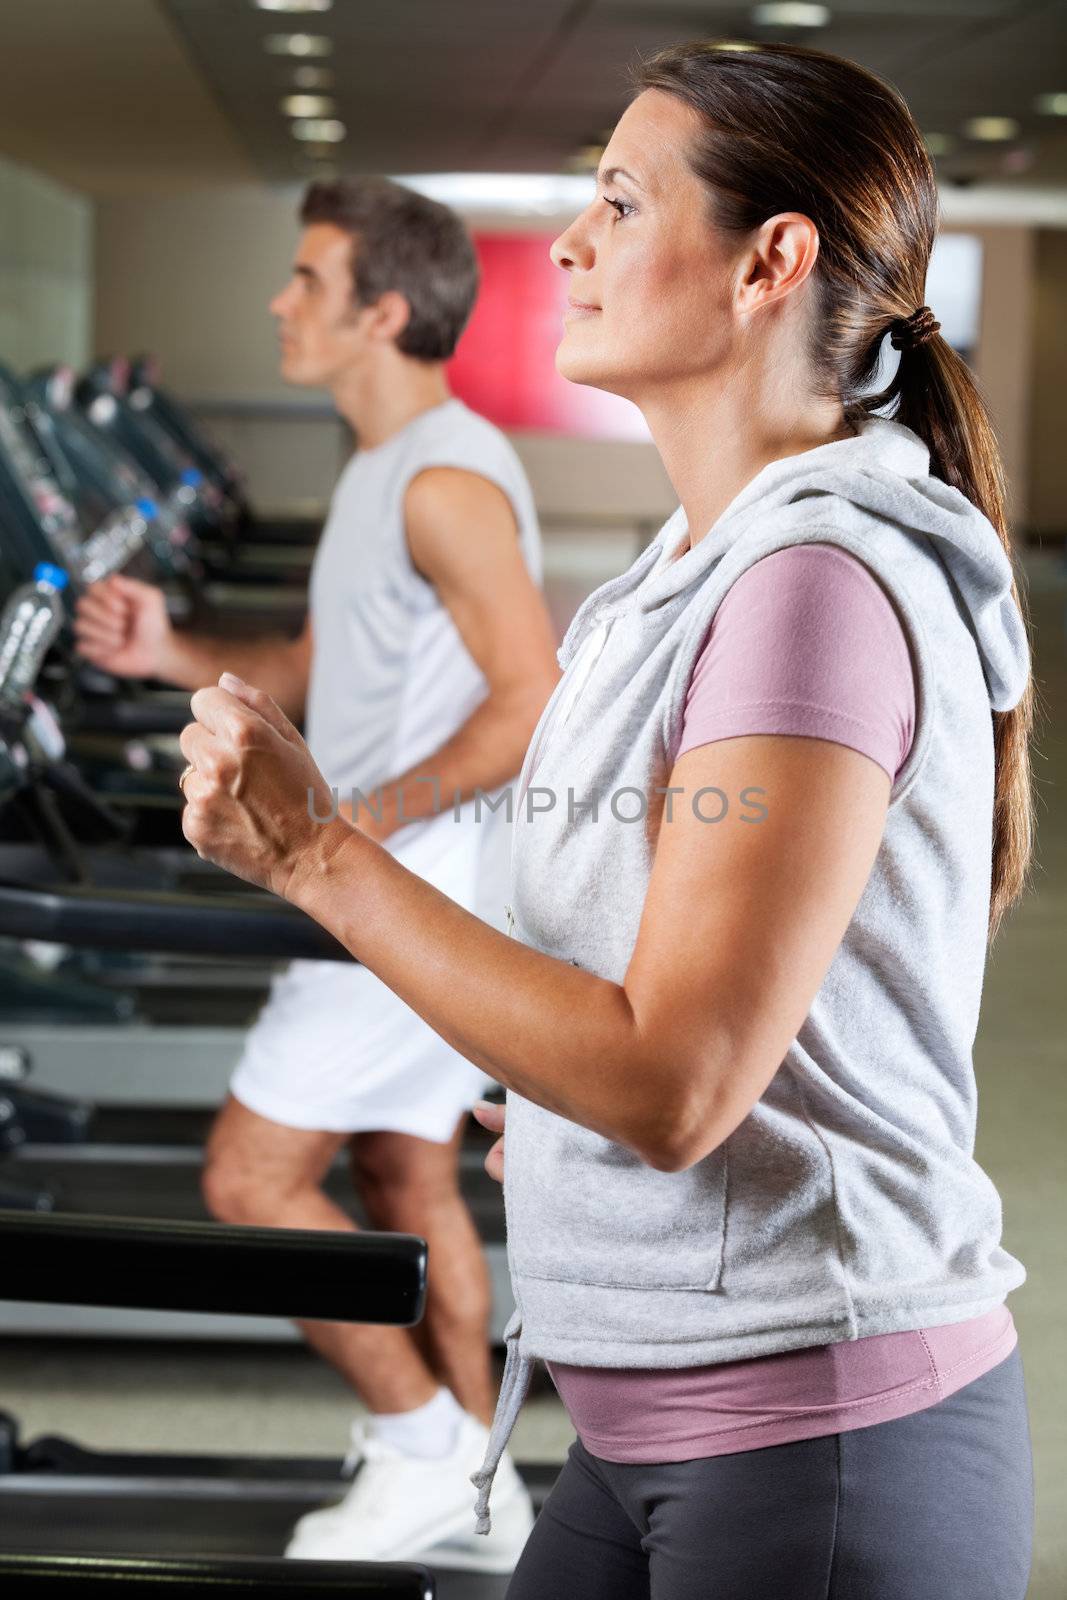 Profile shot of mature woman and man running on treadmill in health club